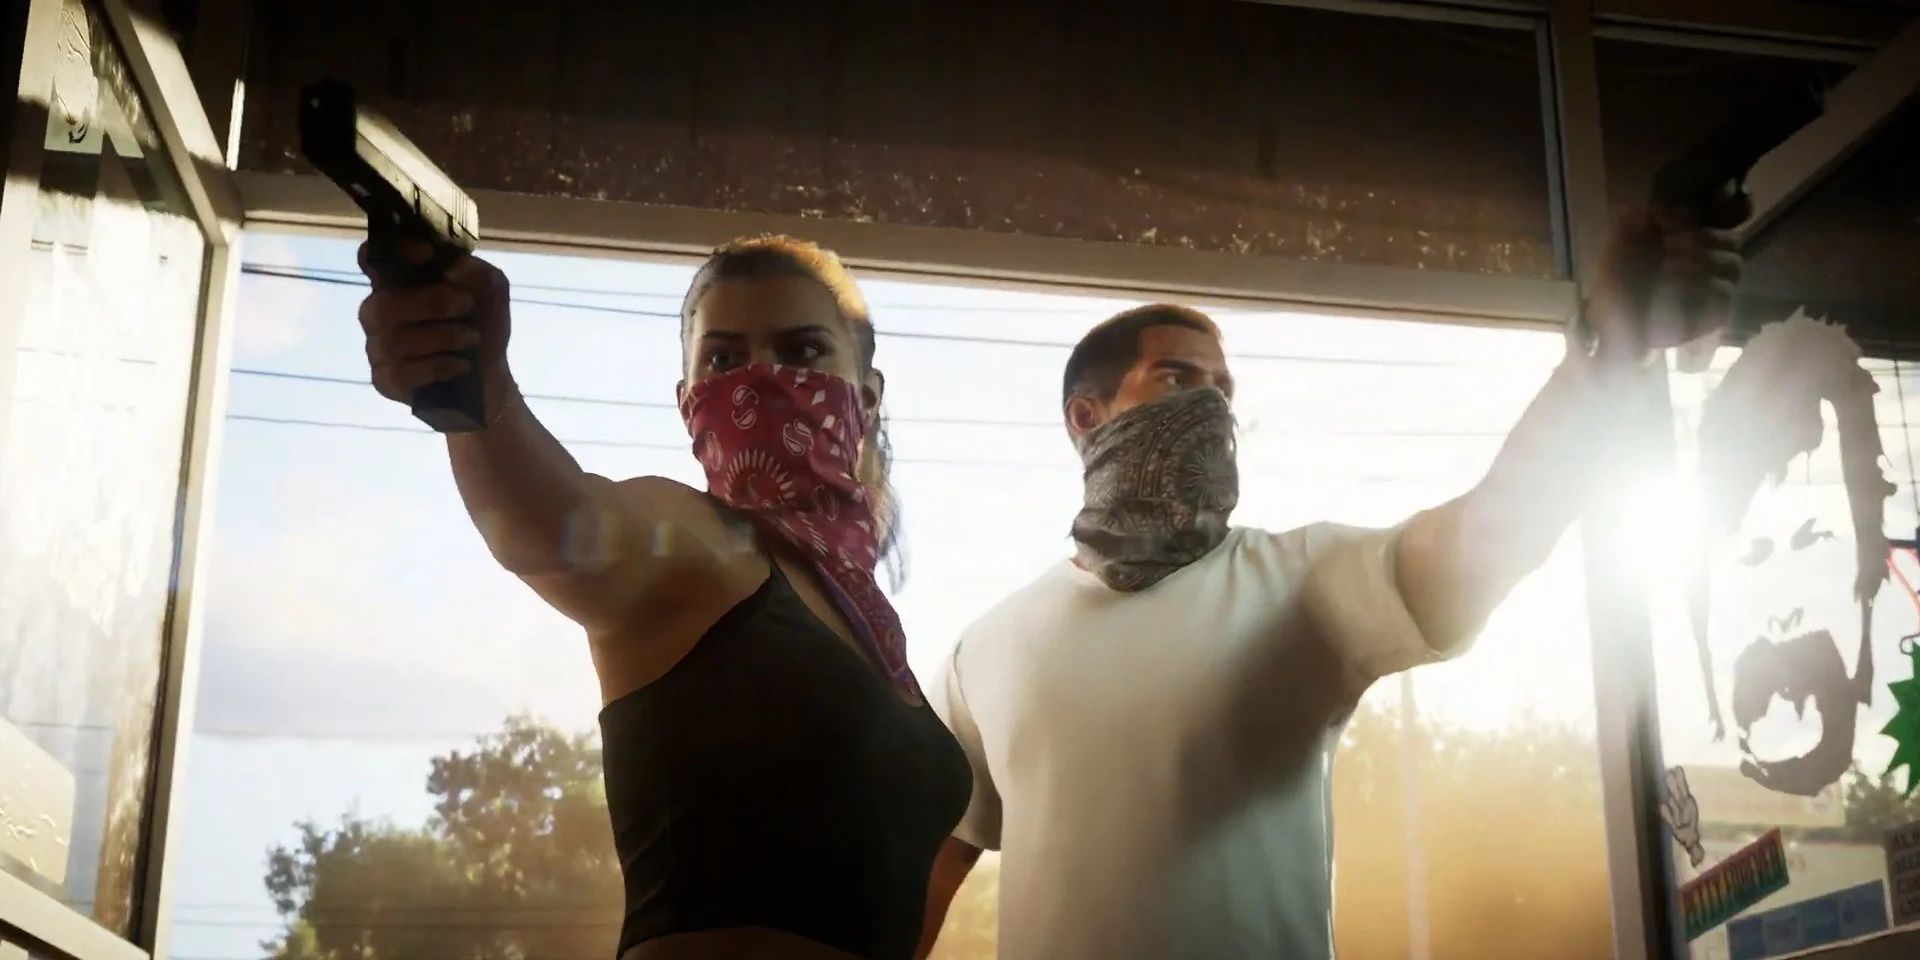 Grand Theft Auto 6 protagonists wearing bandanas with guns pointed while entering a shop